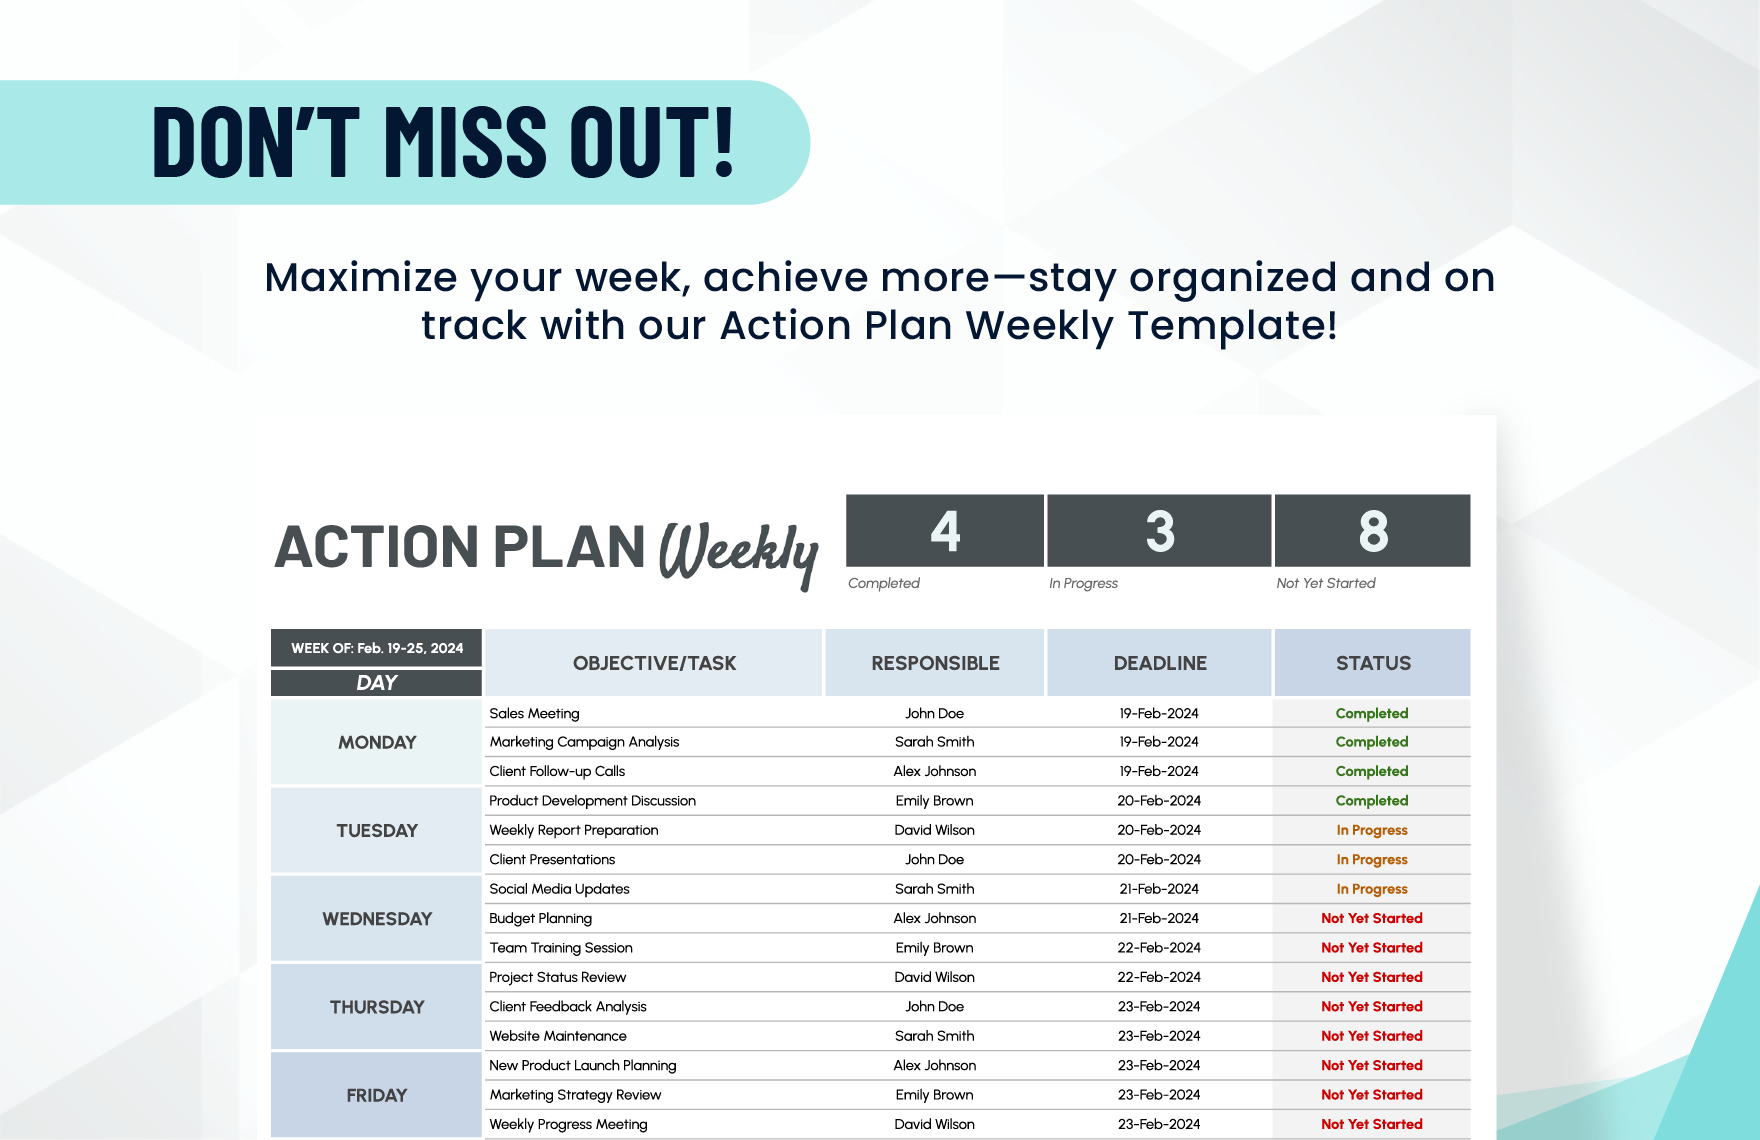 Action Plan Weekly Template